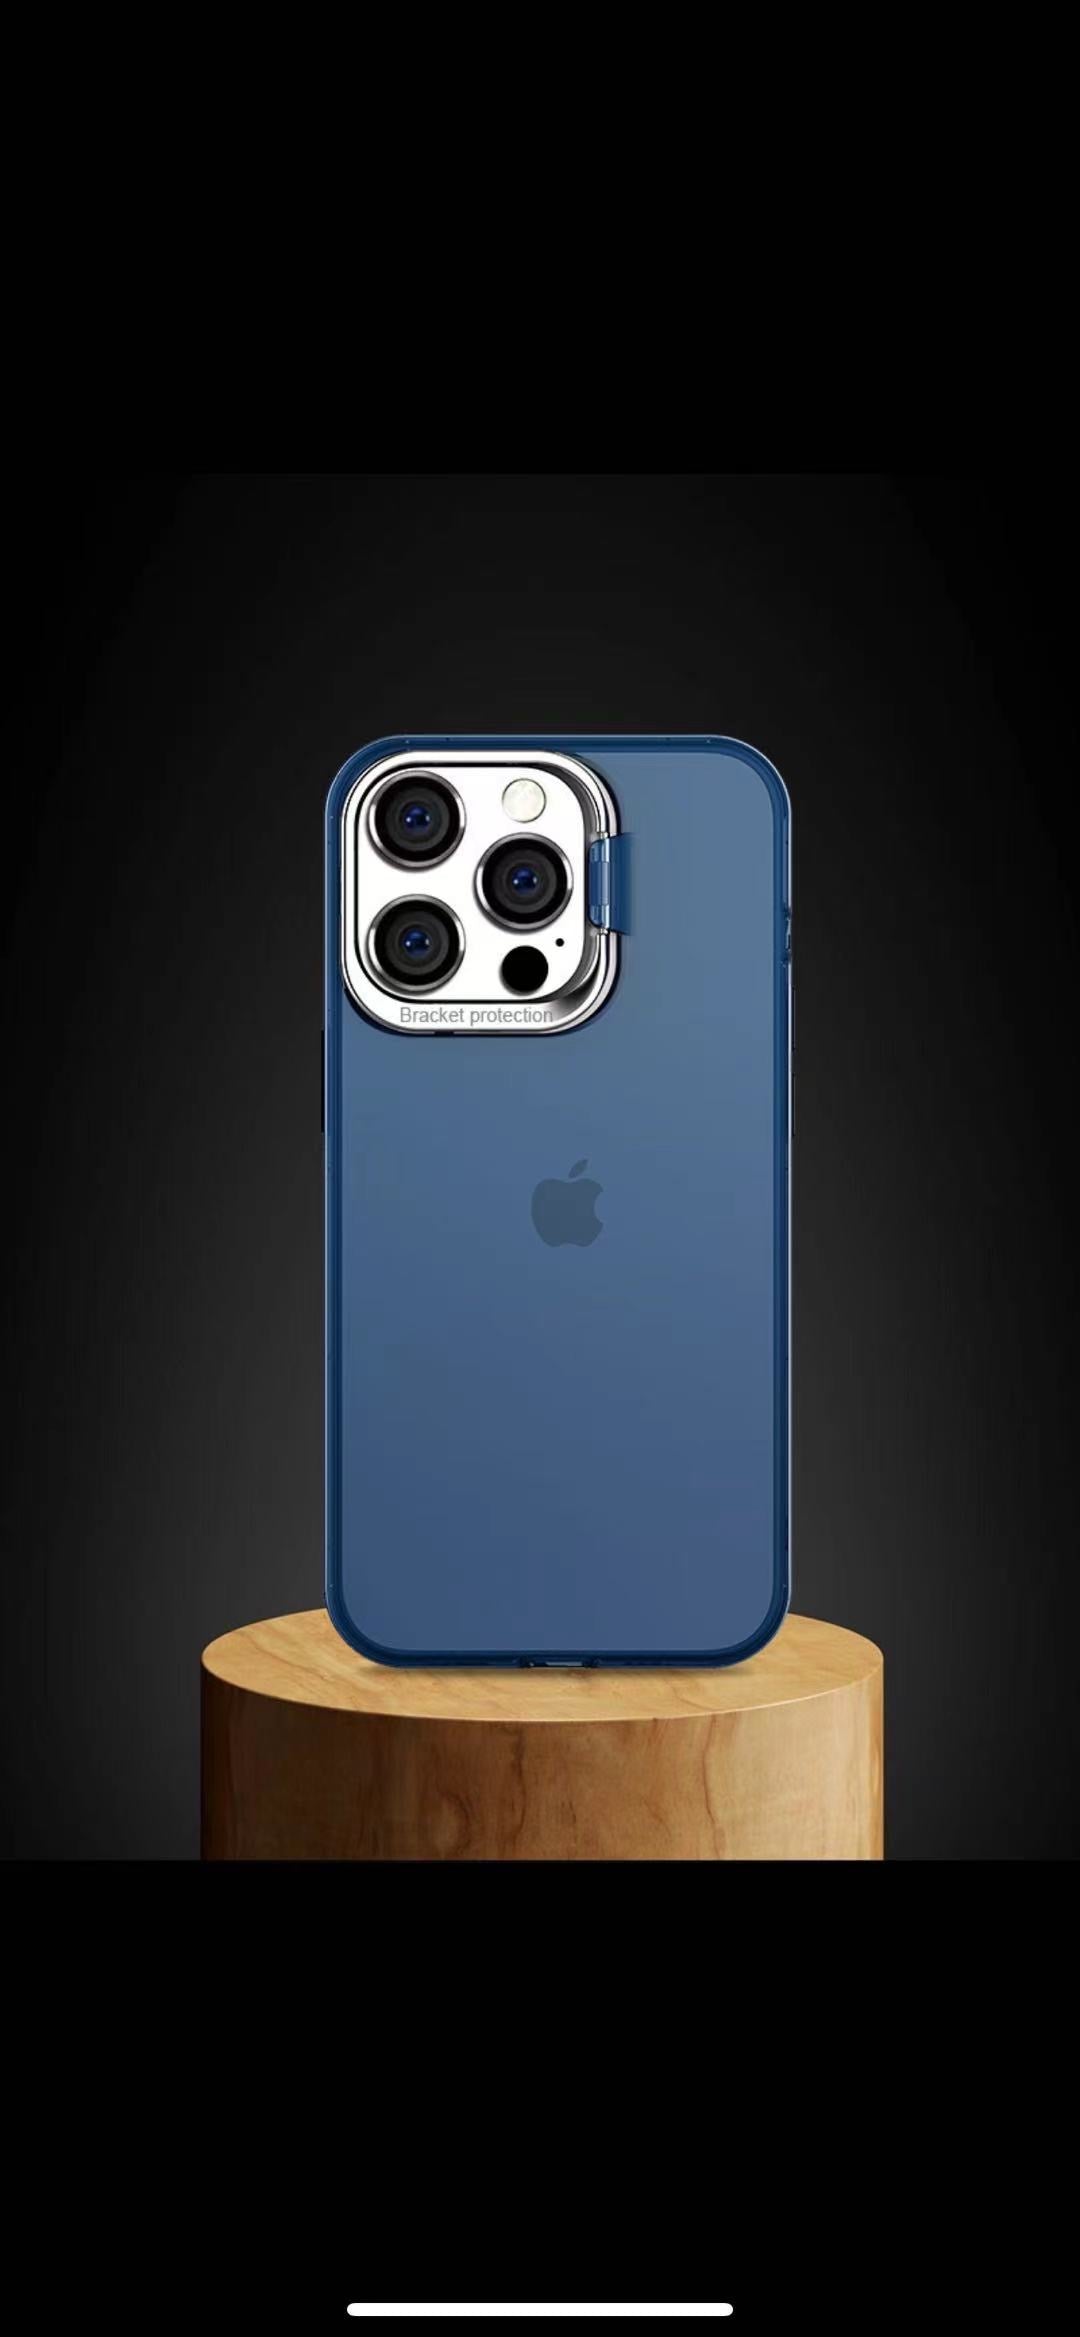 UI Bracket Protection Case for iPhone